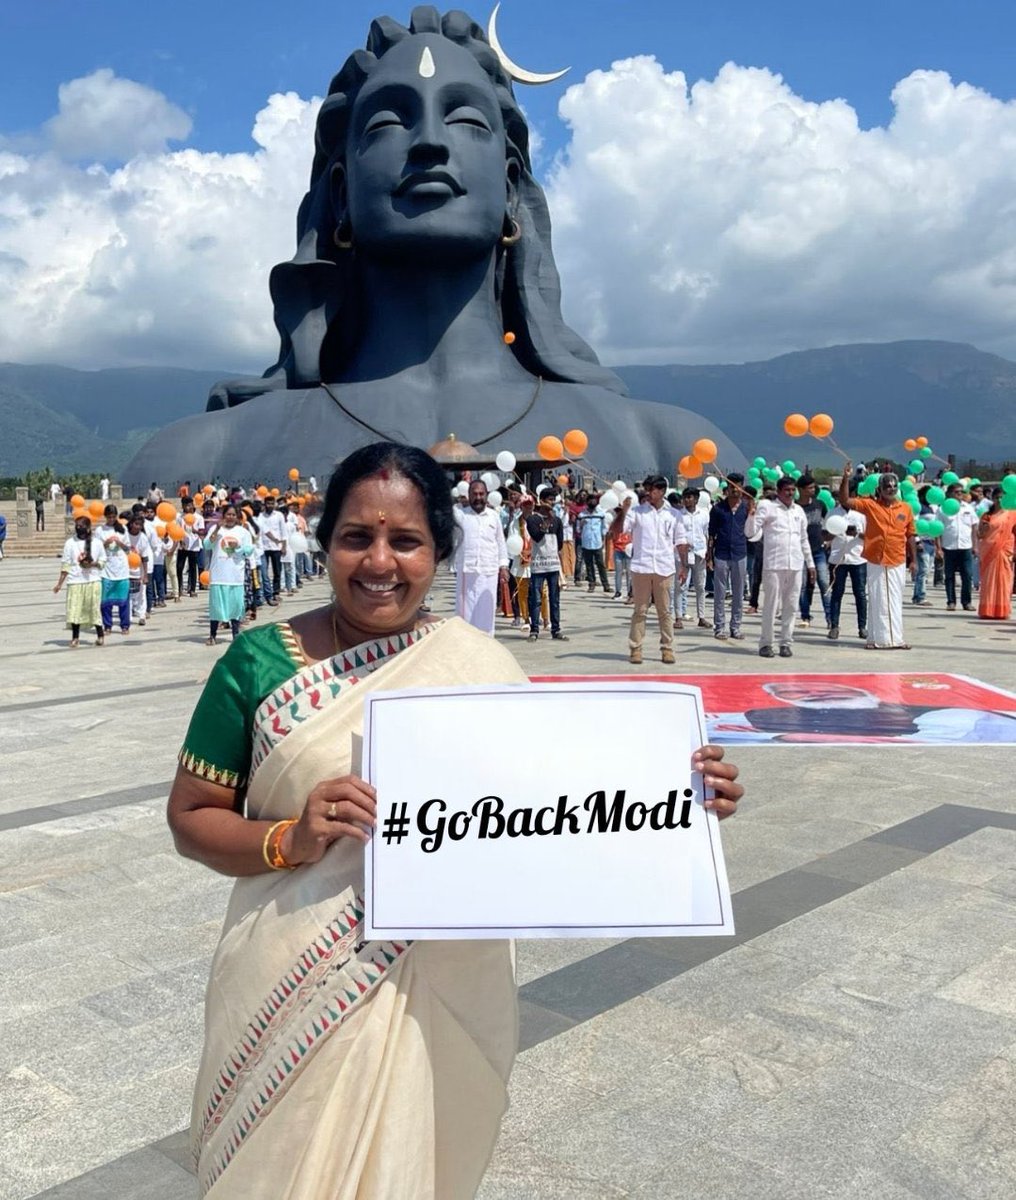 Amusing, that the woman stands with “Go Back Modi” placard in front of Sadhguru’s Ashram. 🤡🤡🤡